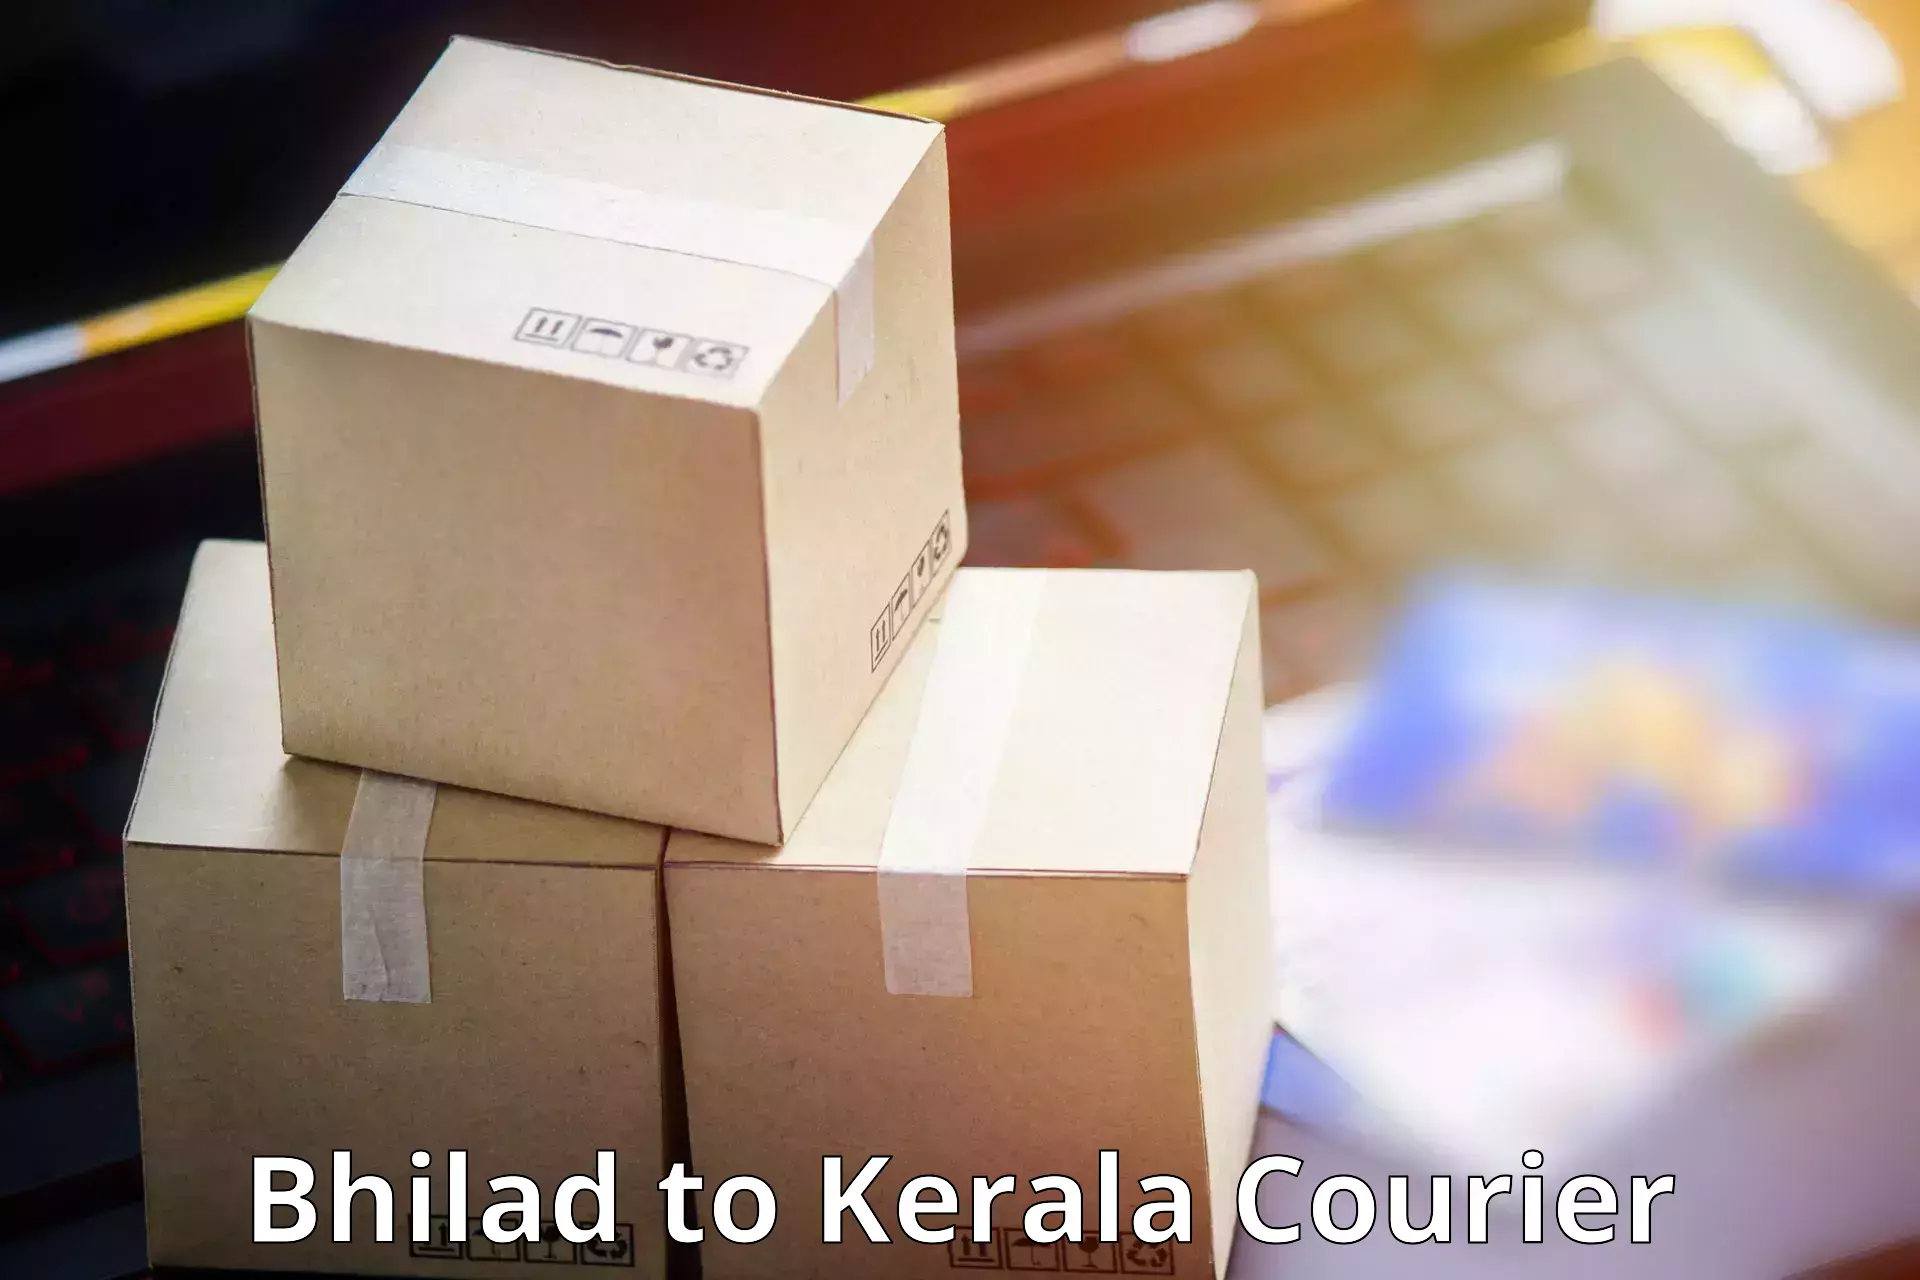 Expedited shipping methods Bhilad to Munnar